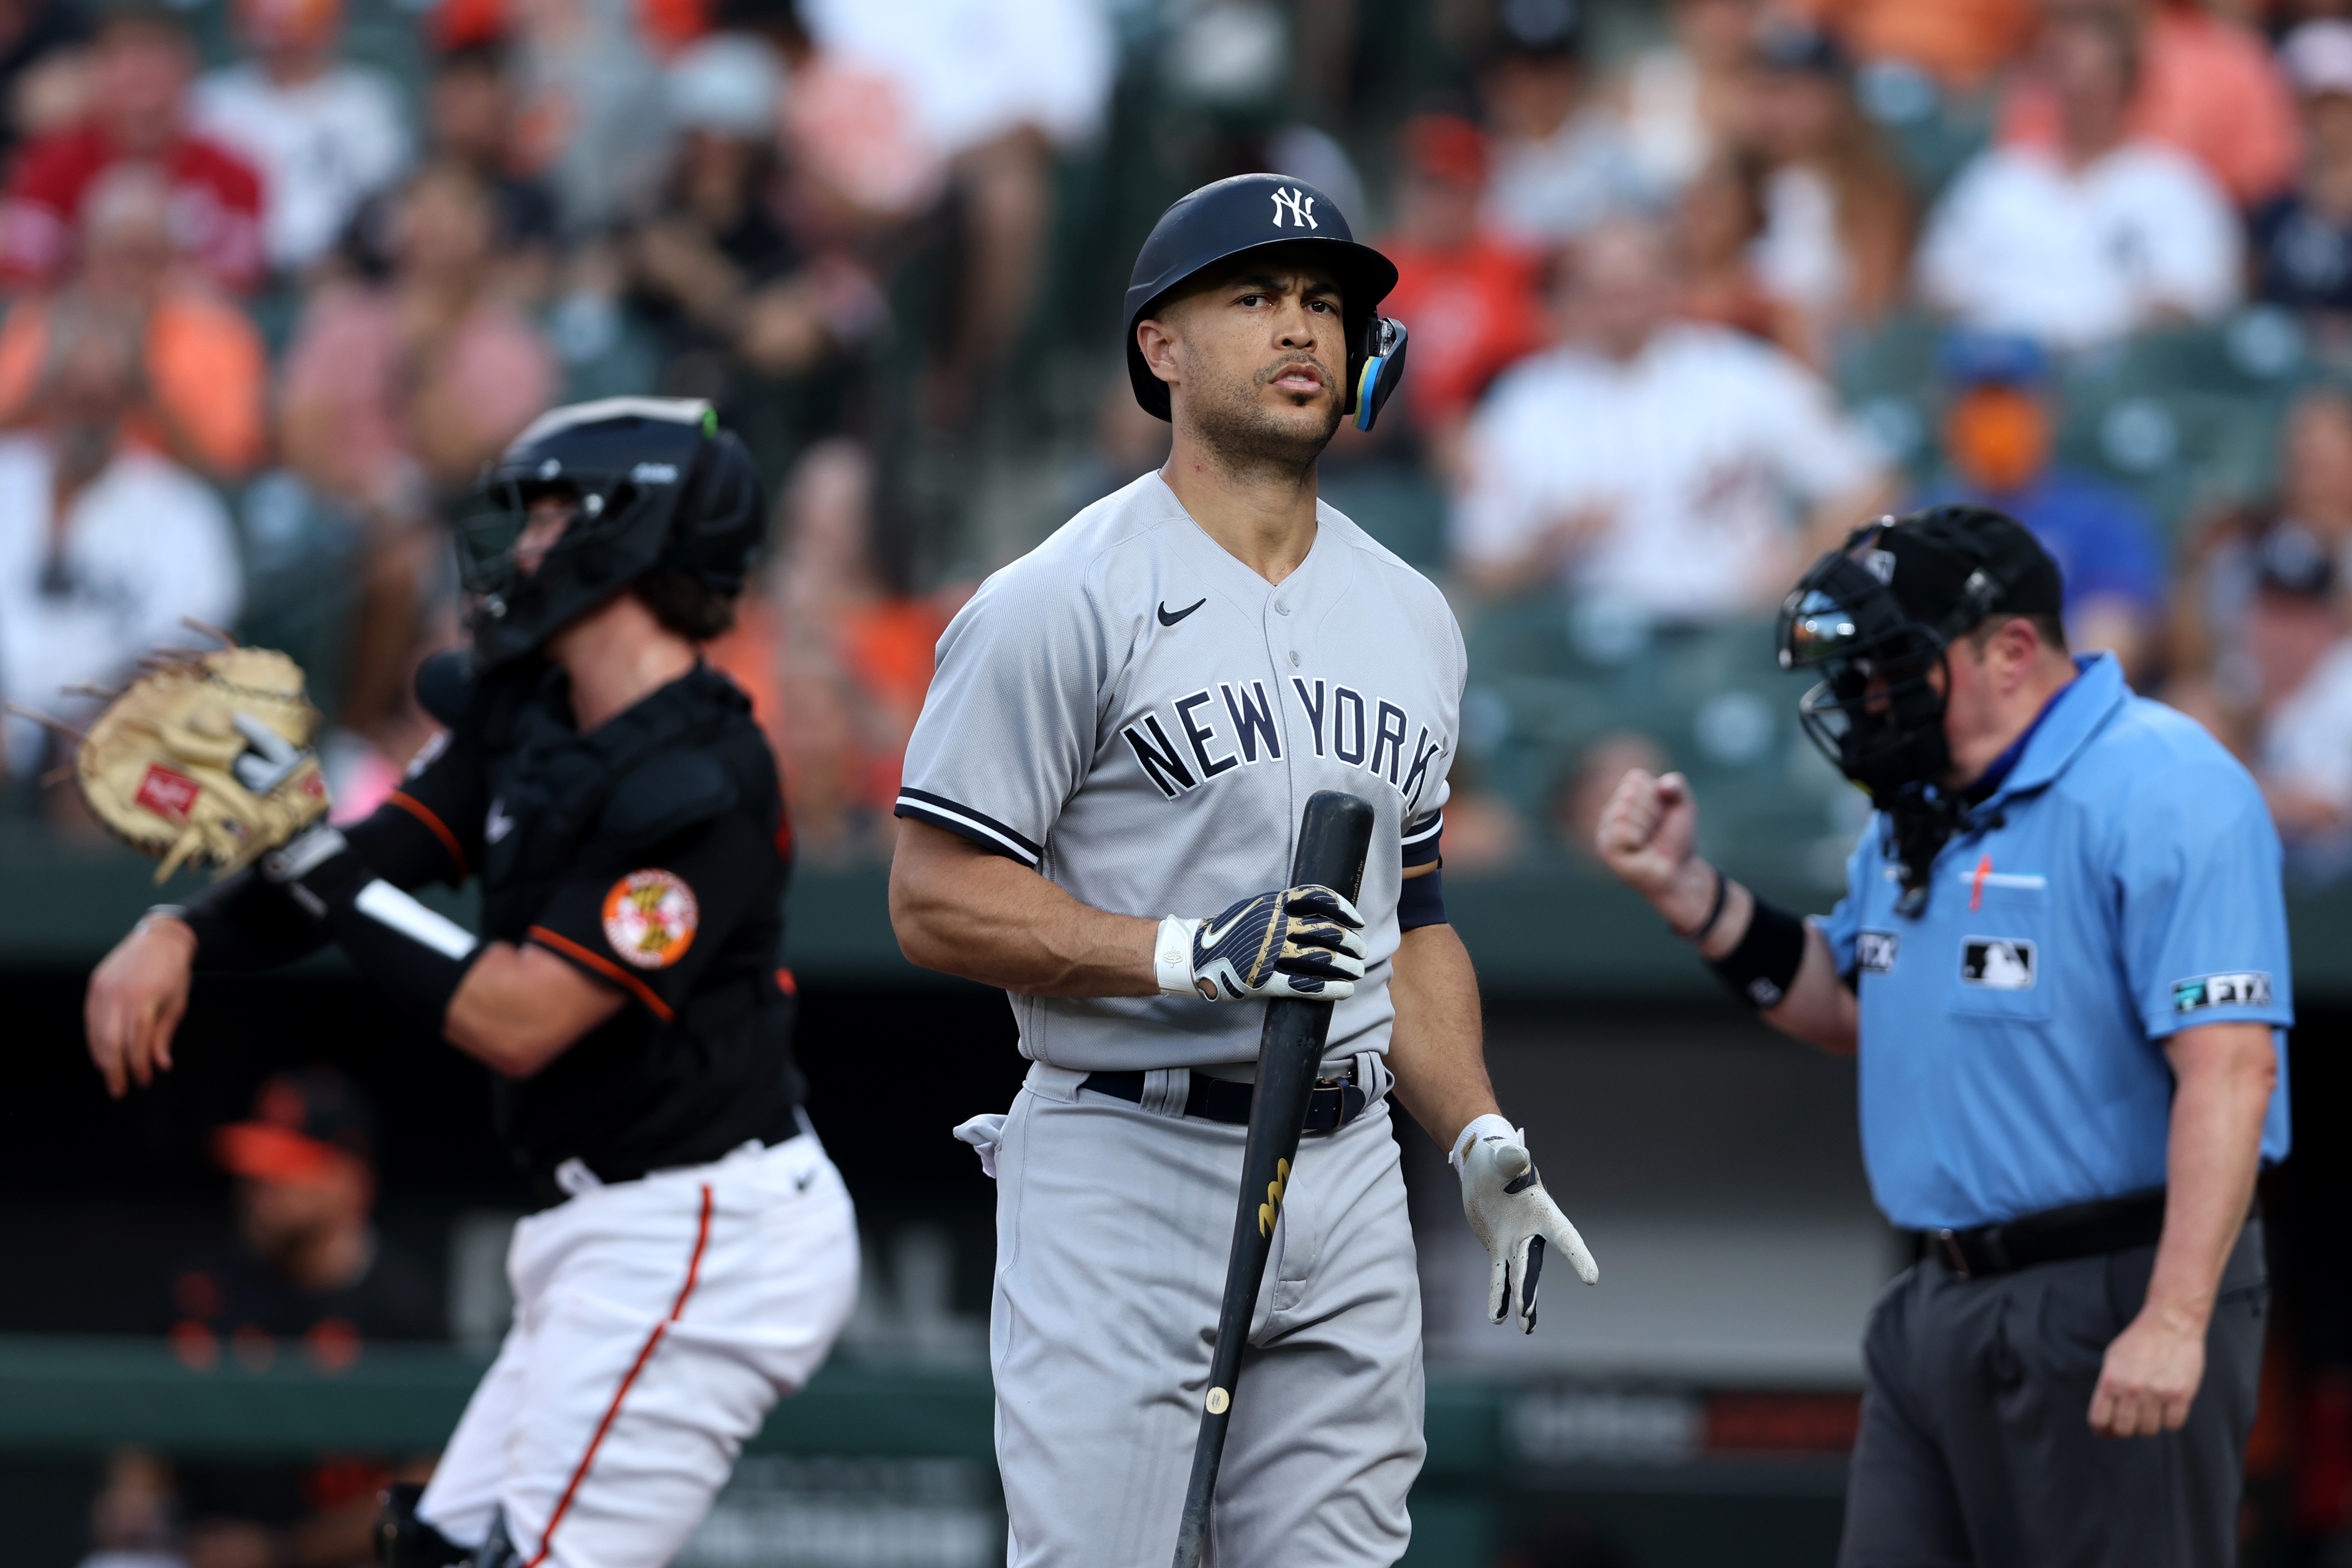 Yankees win 10th straight game, backed by Giancarlo Stanton